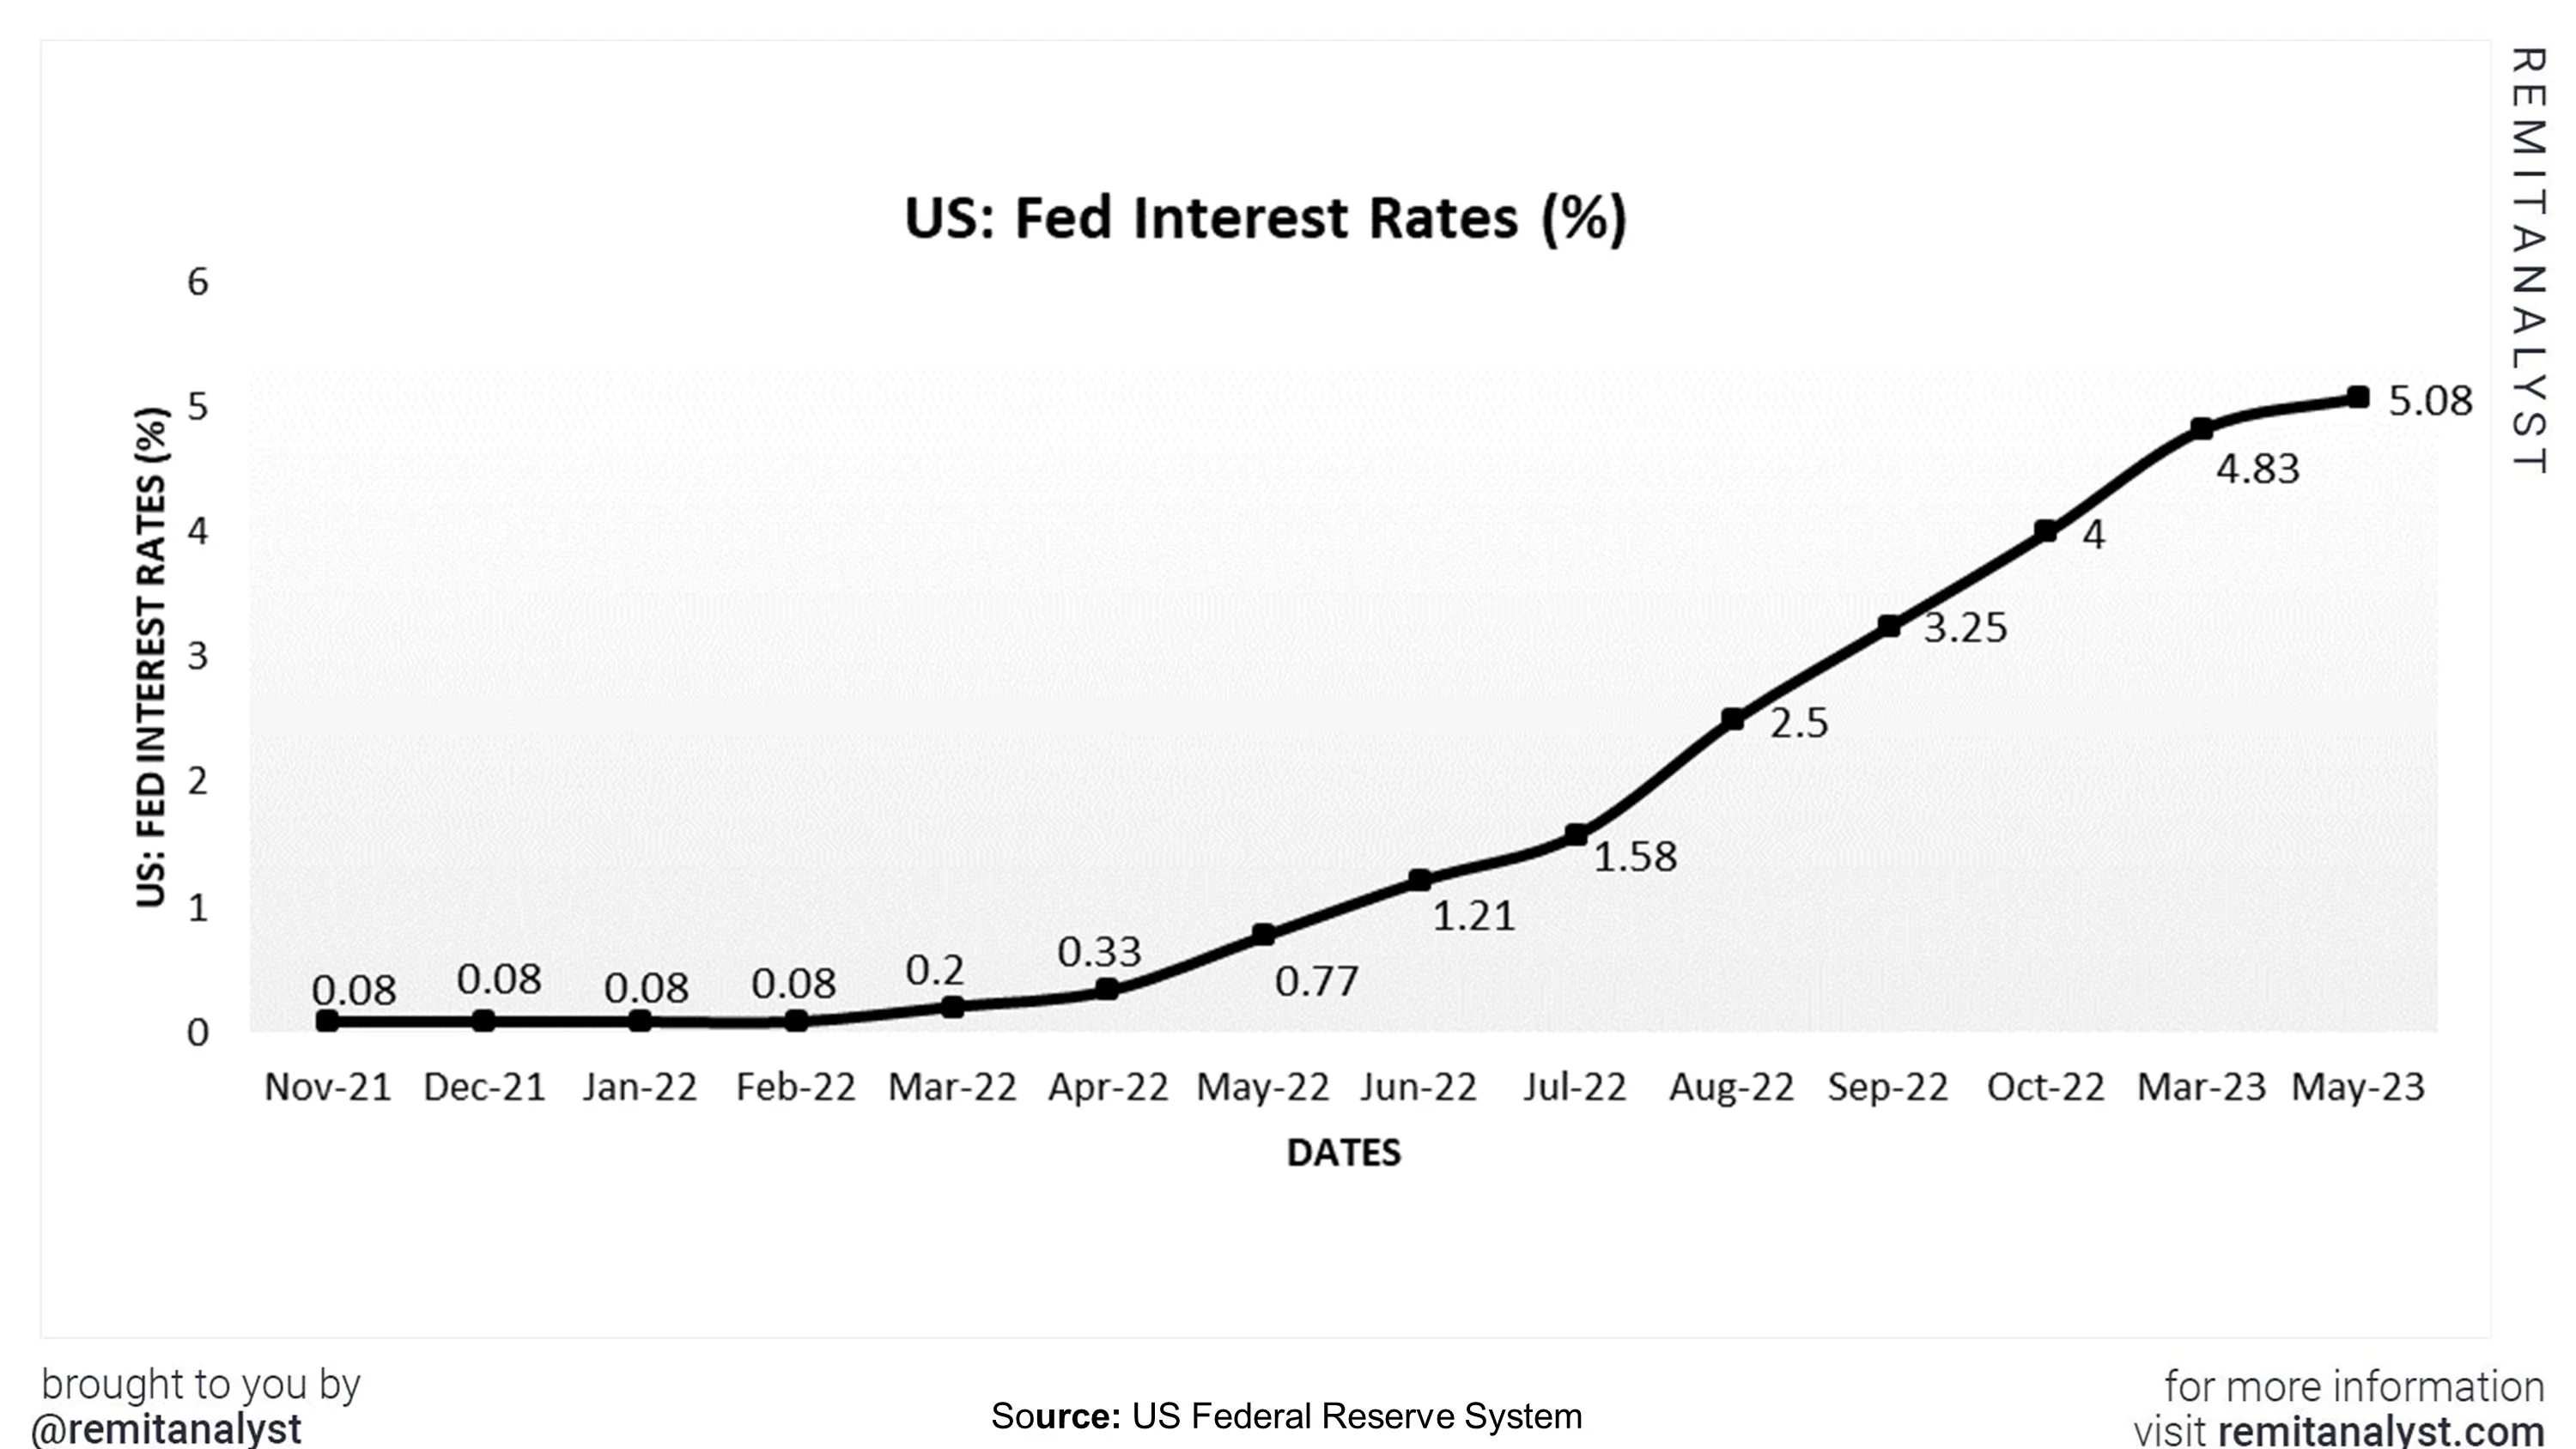 interest-rates-in-us-from-nov-2021-to-may-2023